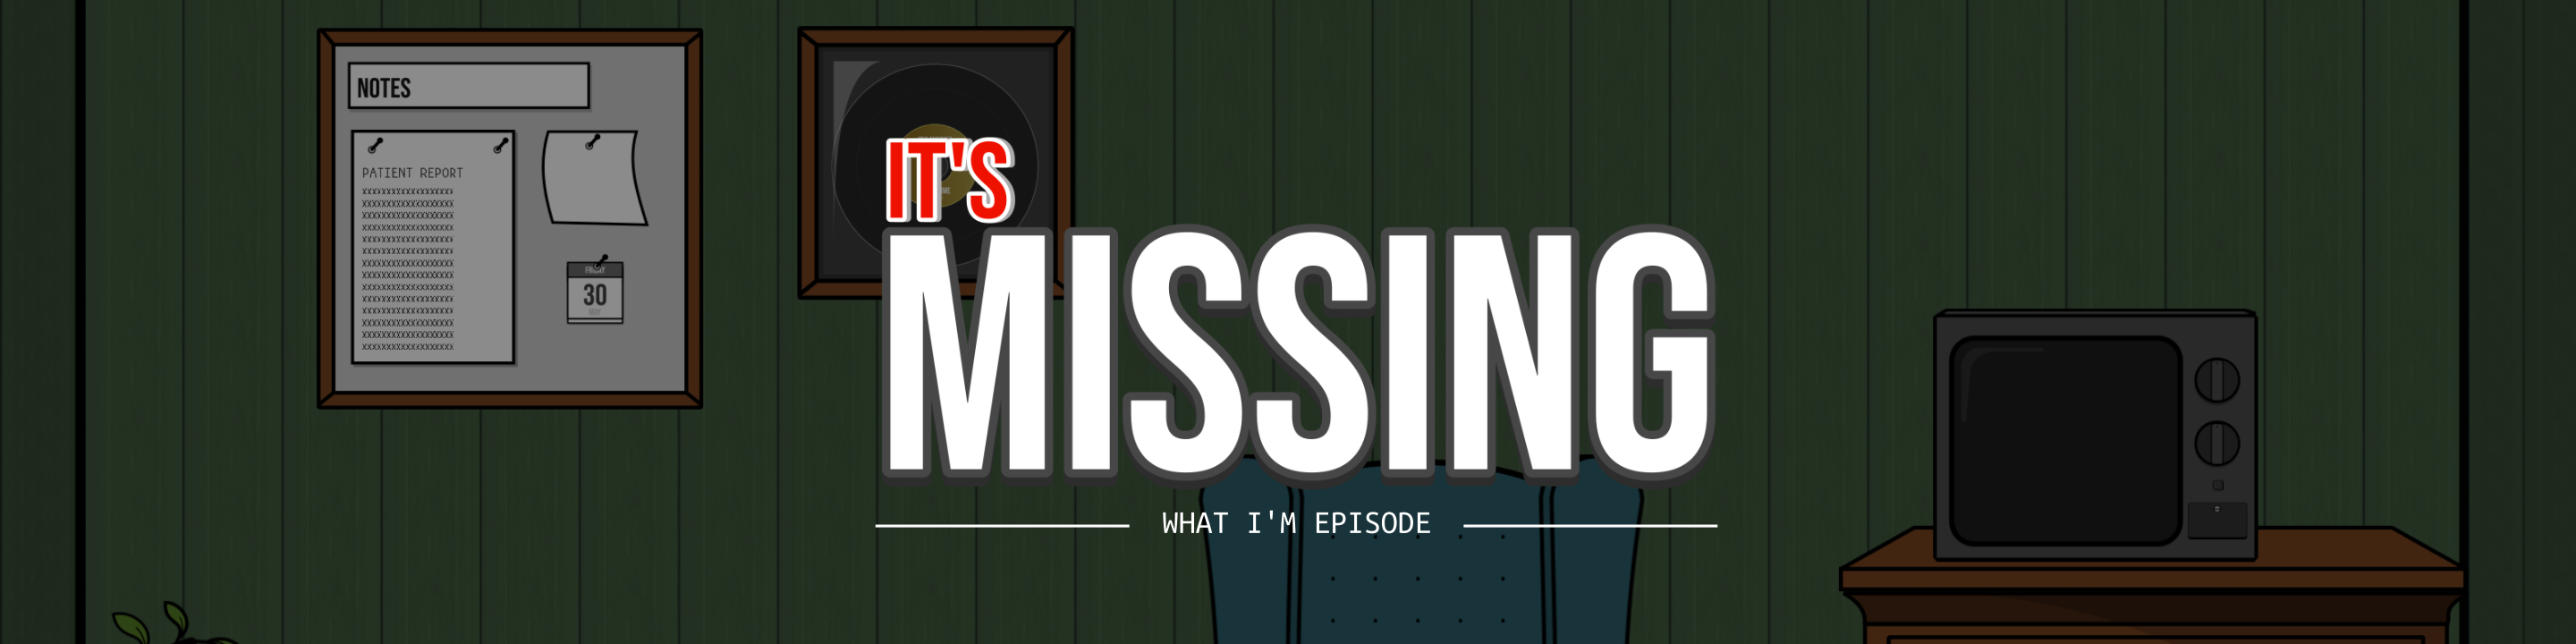 It's Missing: What I'm Episode